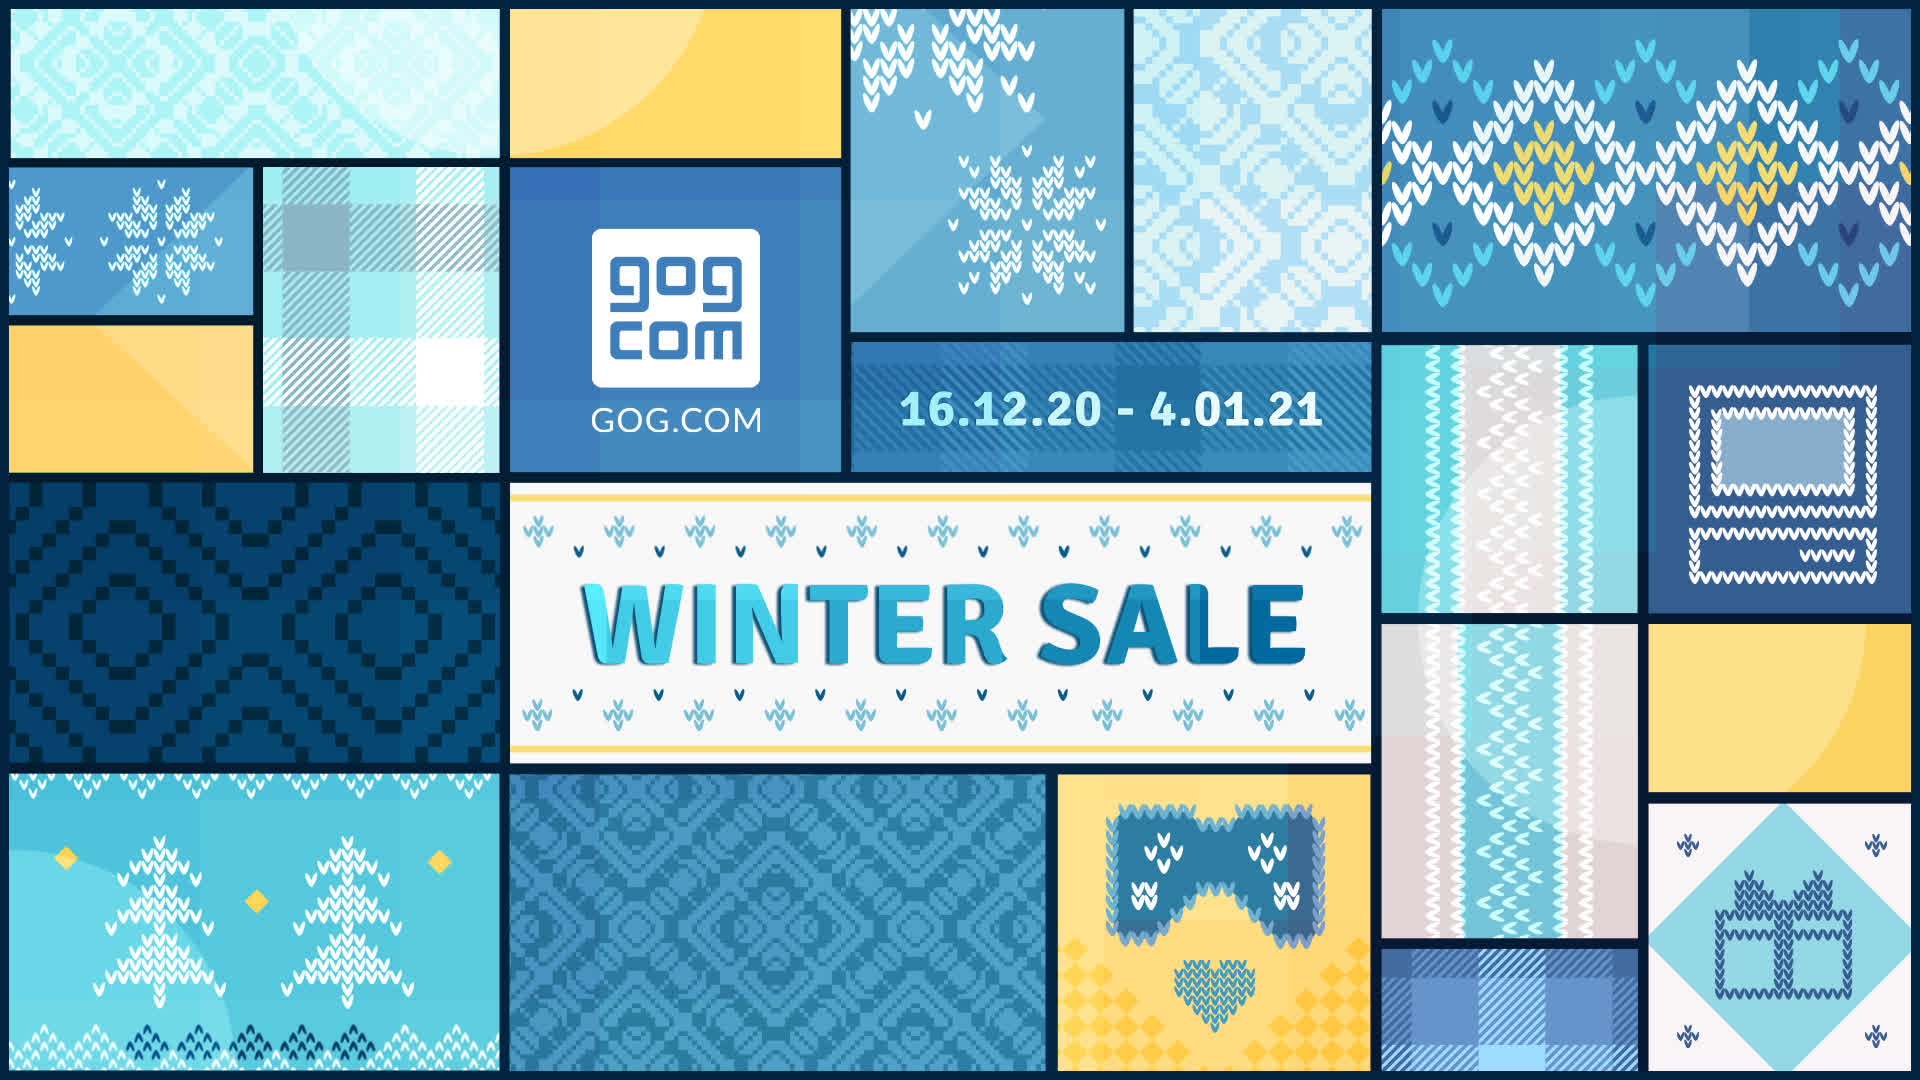 GOG kicks off annual Winter Sale with free game offer